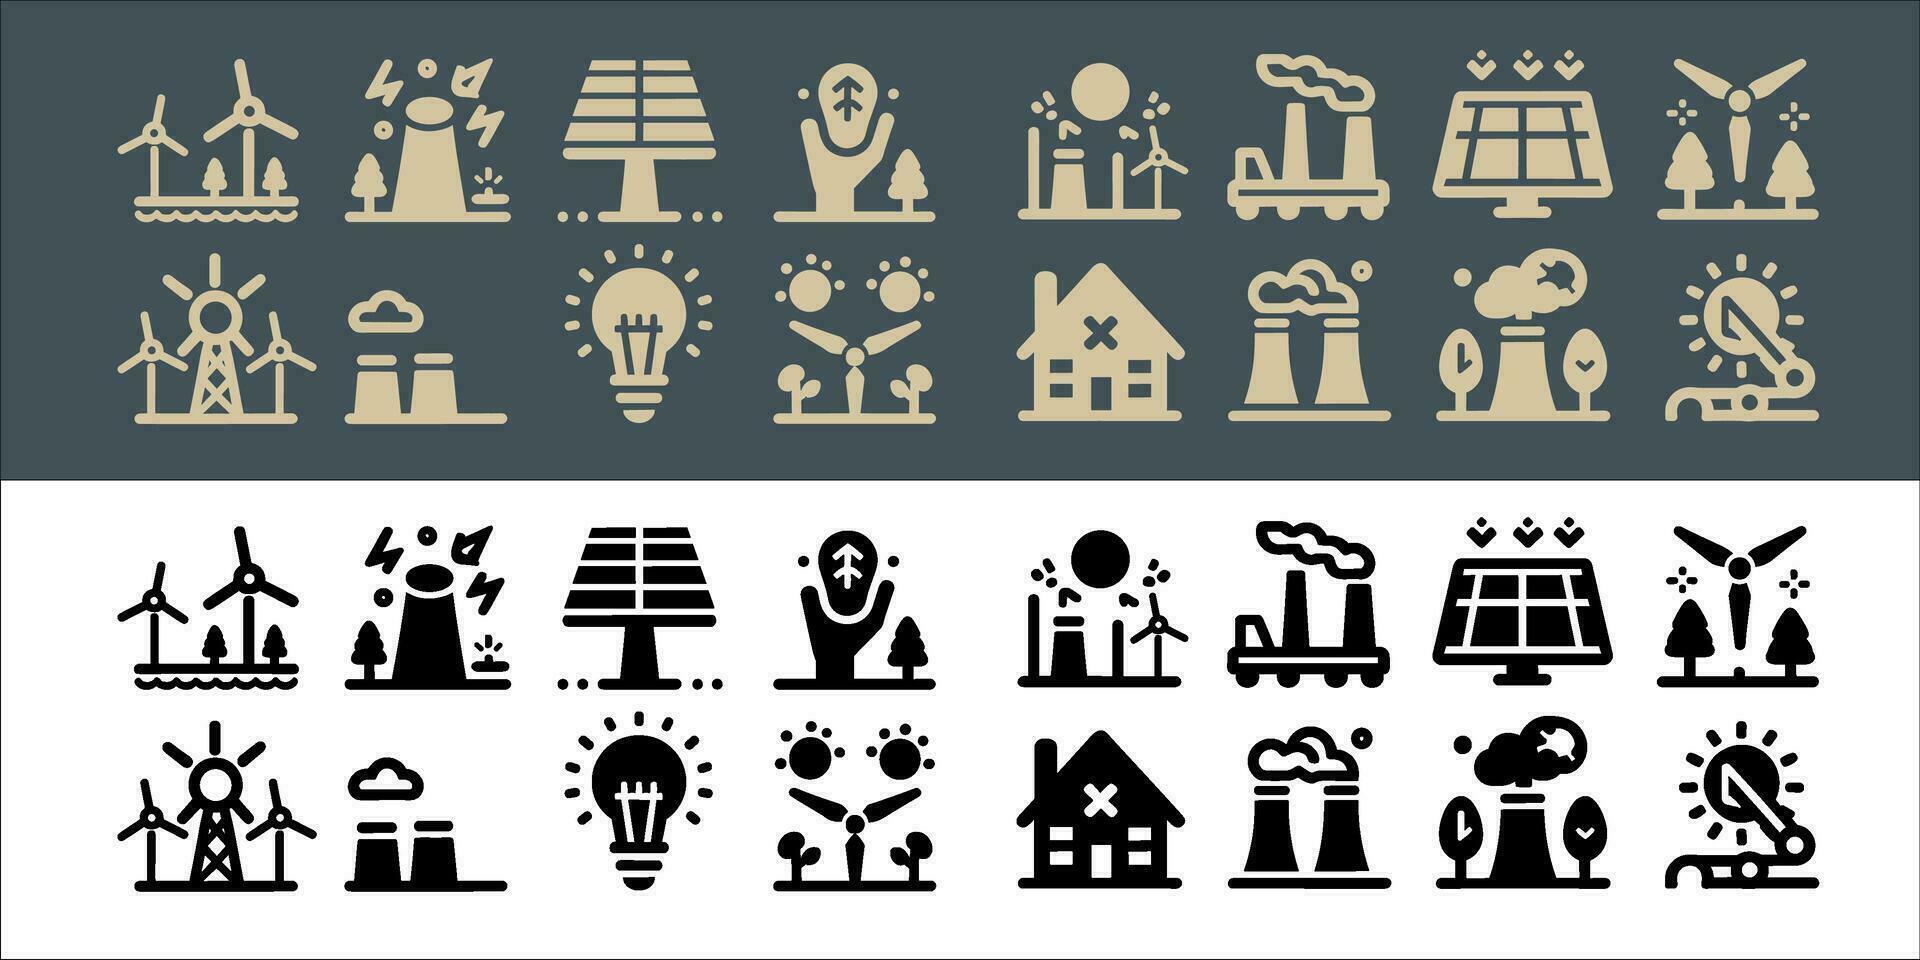 Windmill turbine vector set icons. renewable energy, alternative sources energy and eco friendly with transparent background